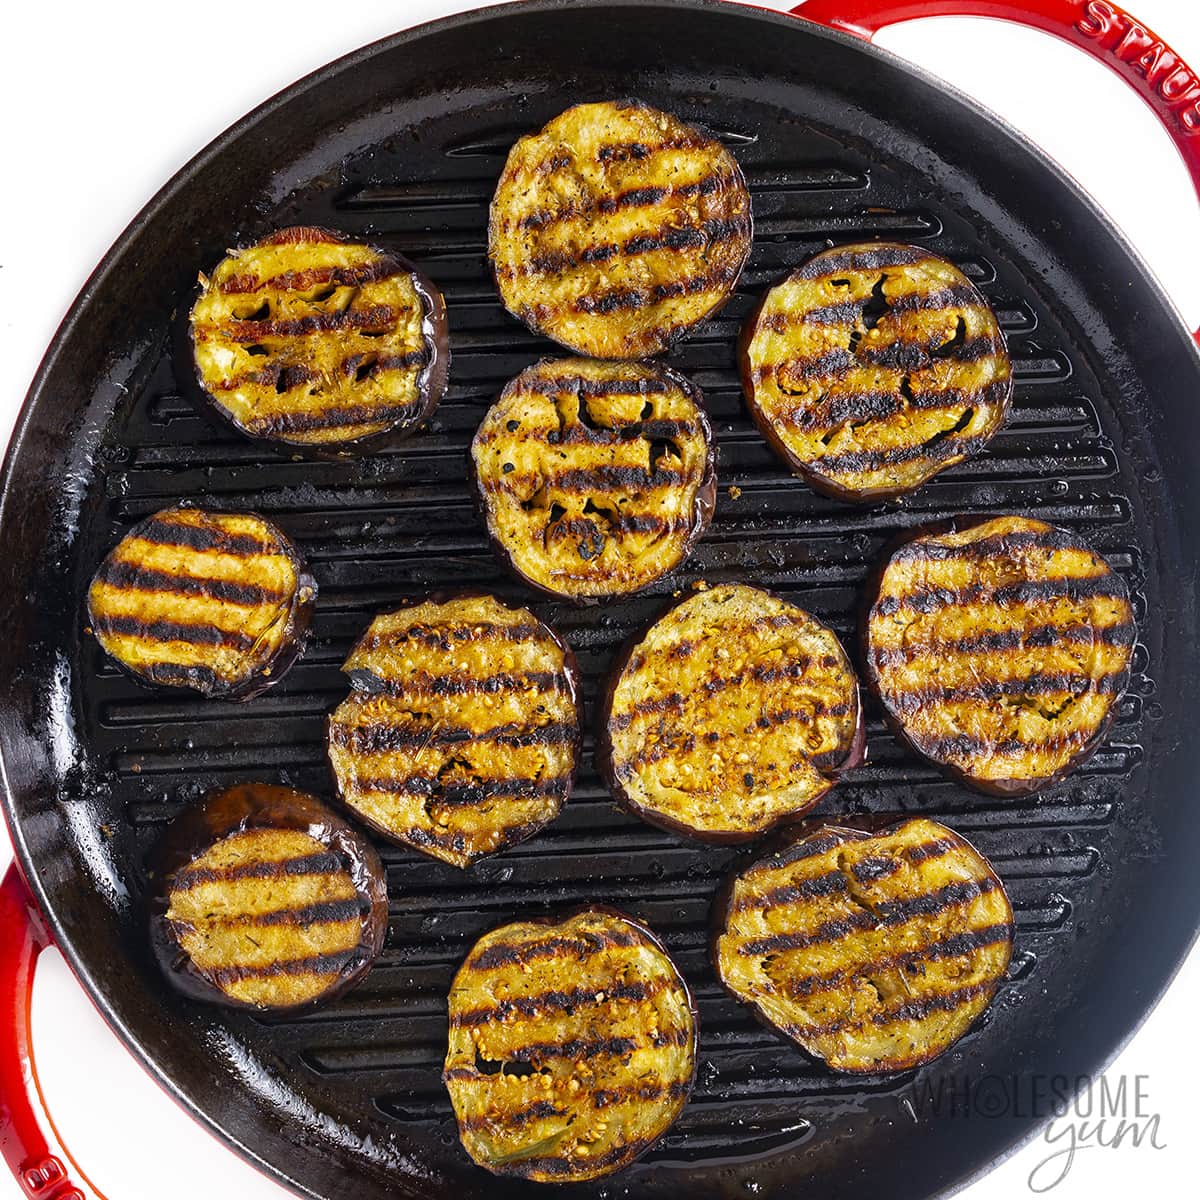 Eggplant on the grill with grill marks.